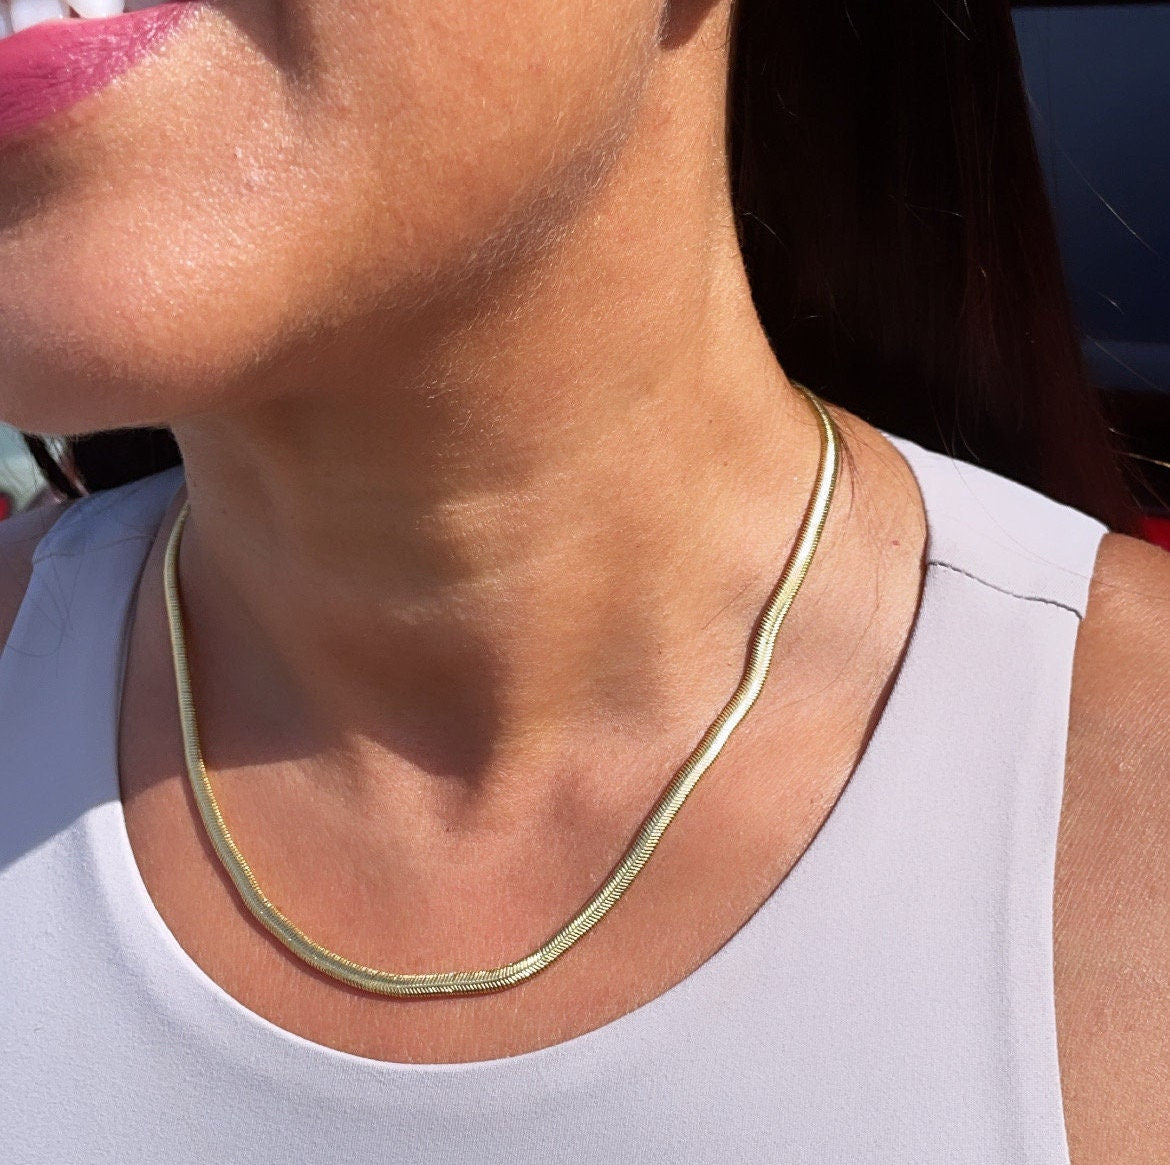 18K Gold Flat Thin Chain Necklace